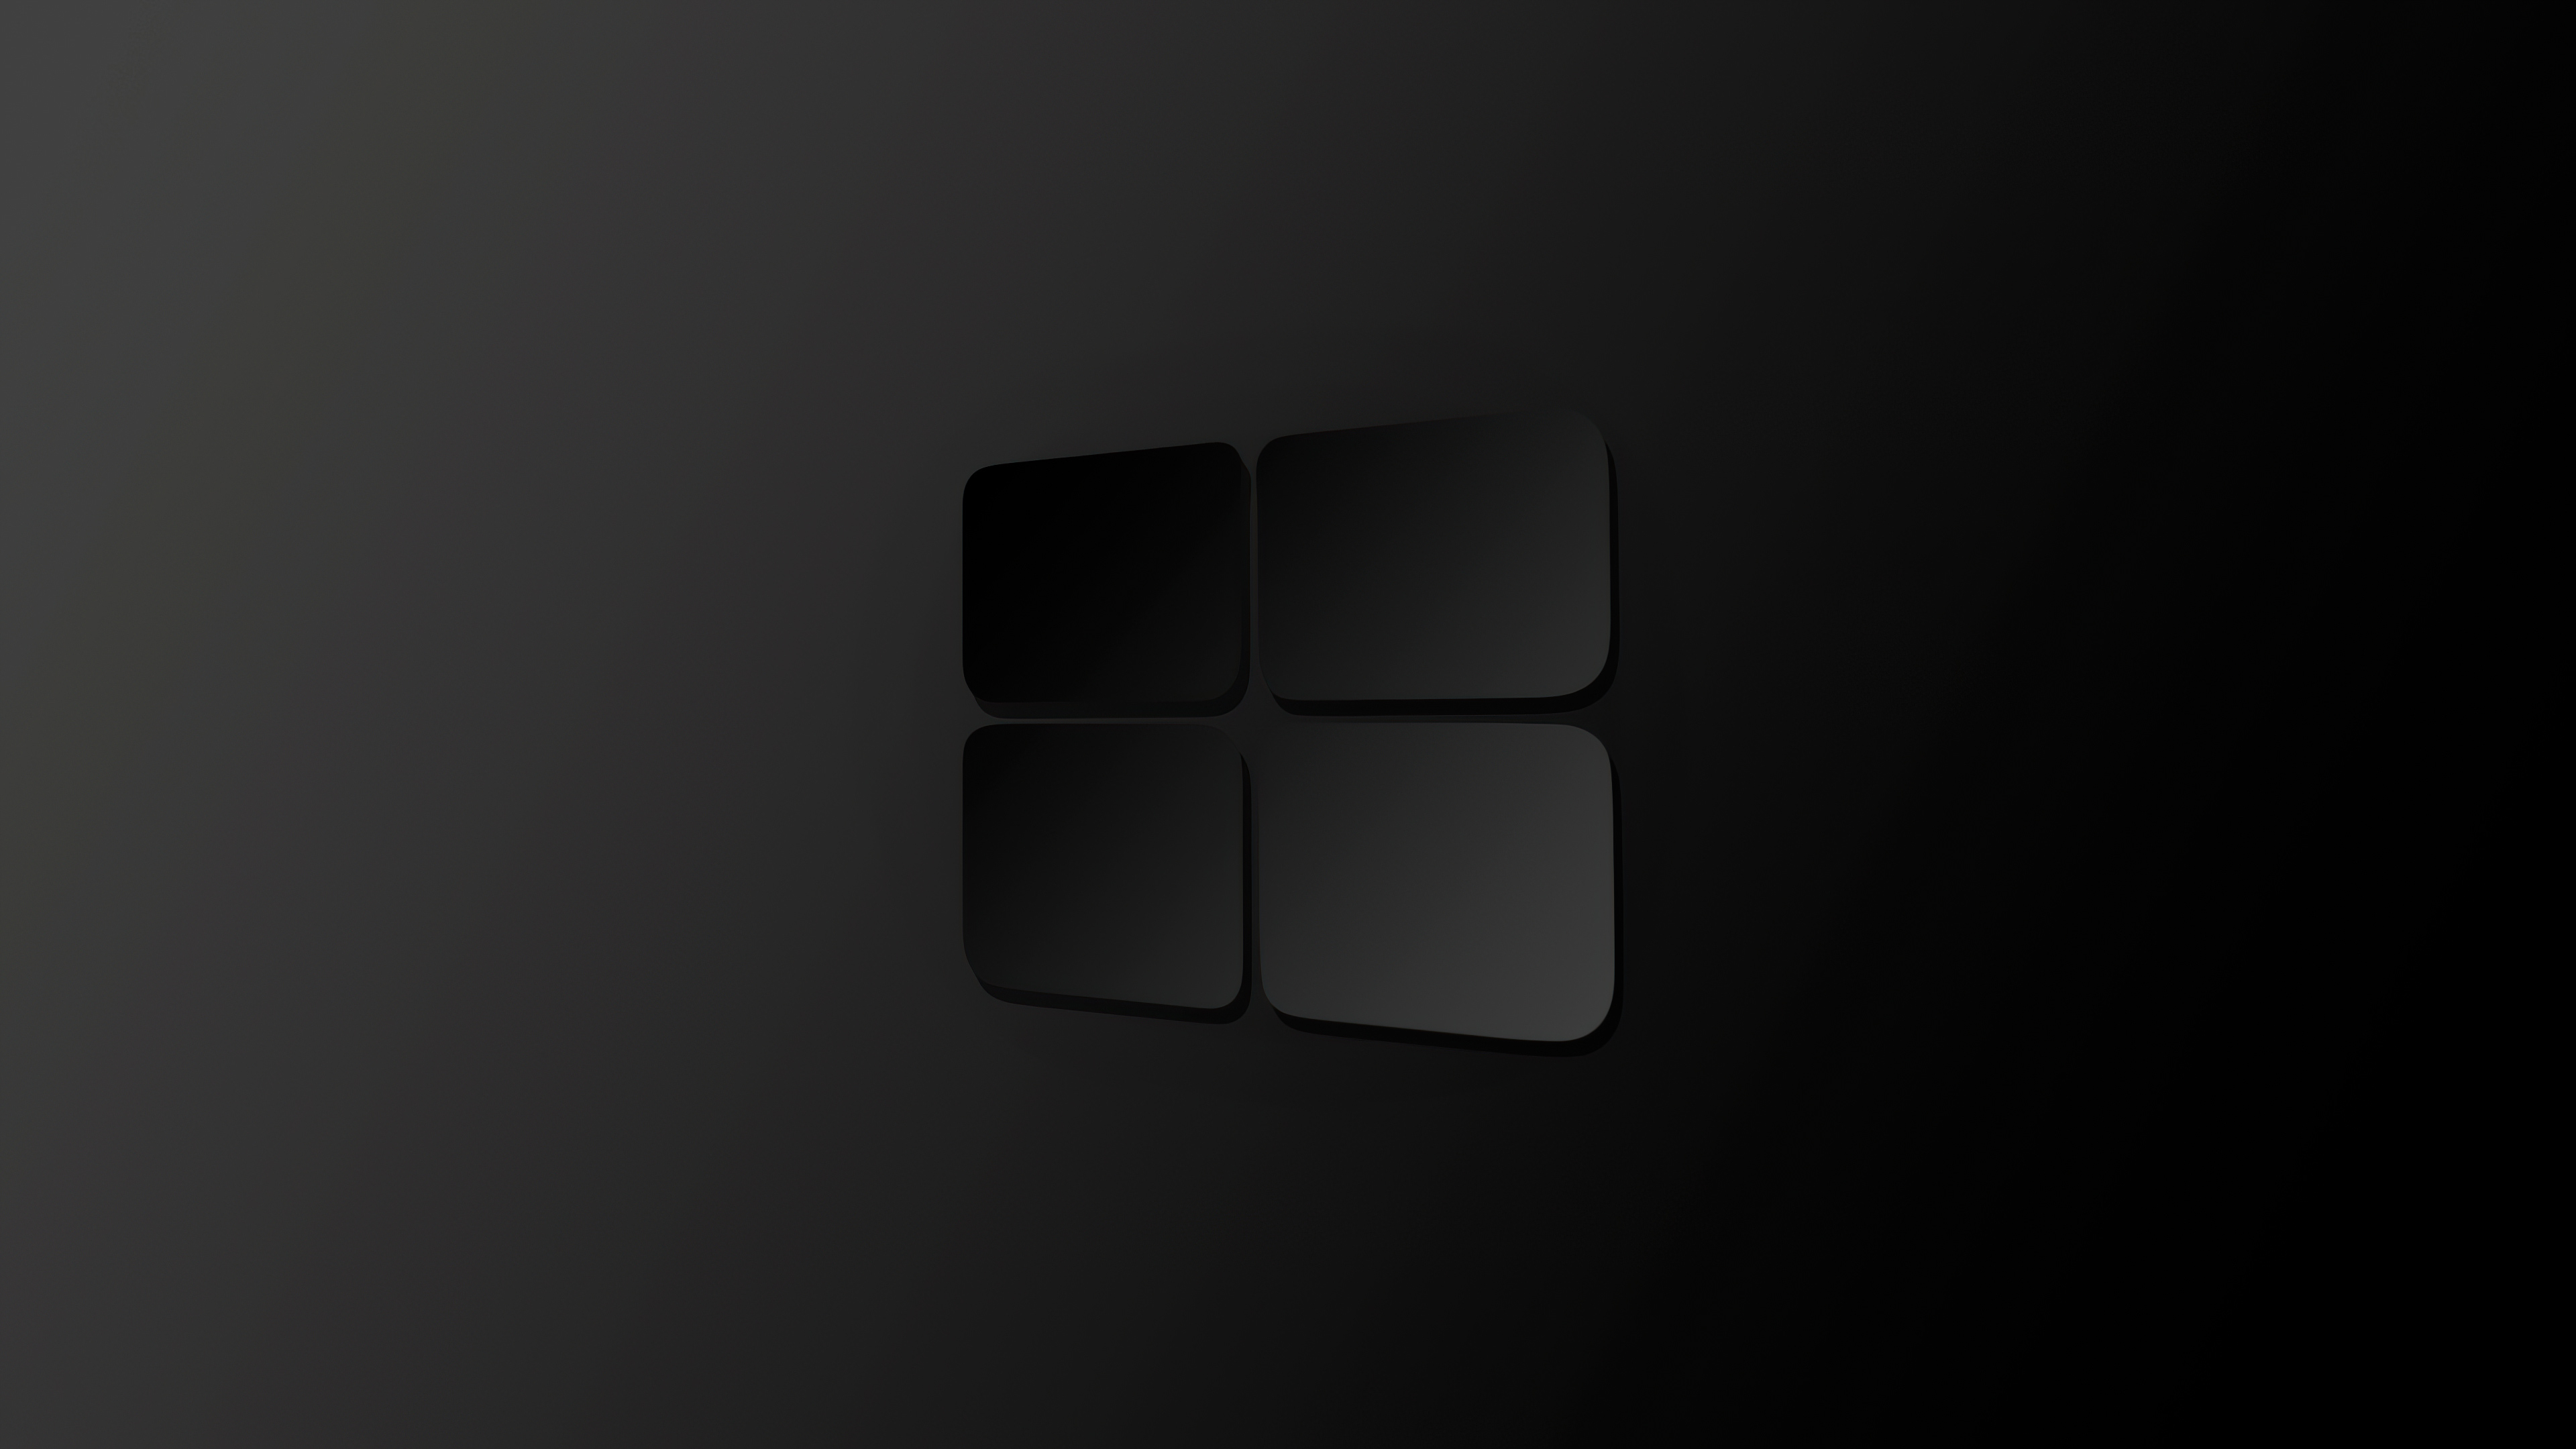 3840x2160 1152x864 Windows 10 Darkness Logo 4k 1152x864 Resolution HD 4k Wallpapers, Images, Backgrounds, Photos and Pictures